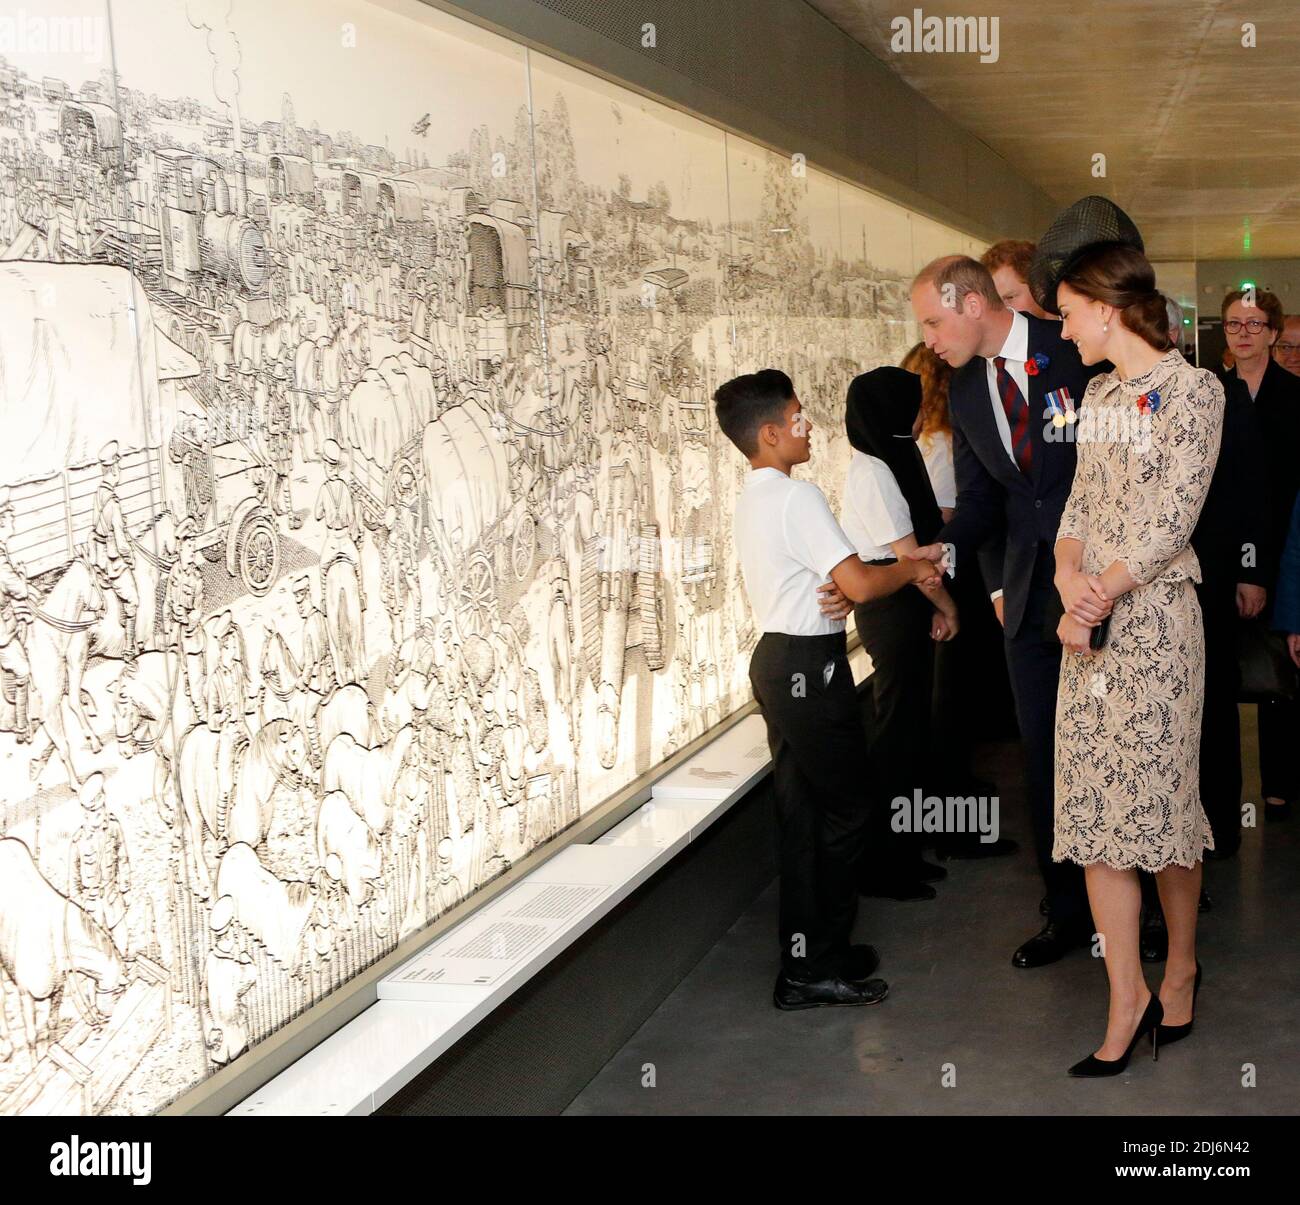 Britain's Prince William, the Duke of Cambridge, and his wife Kate, the Duchess of Cambridge, visit a museum inside the World War I Thiepval Monument prior to the Somme centenary commemorations in Thiepval, northern France, Friday, July 1st, 2016. One week after Britain's vote to leave the European Union, Prime Minister David Cameron and royal family members will stand side-by-side with France's President to celebrate their historic alliance at the centenary of the deadliest battle of World War I. Photo by Francois Mori/Pool/ABACAPRESS.COM Stock Photo